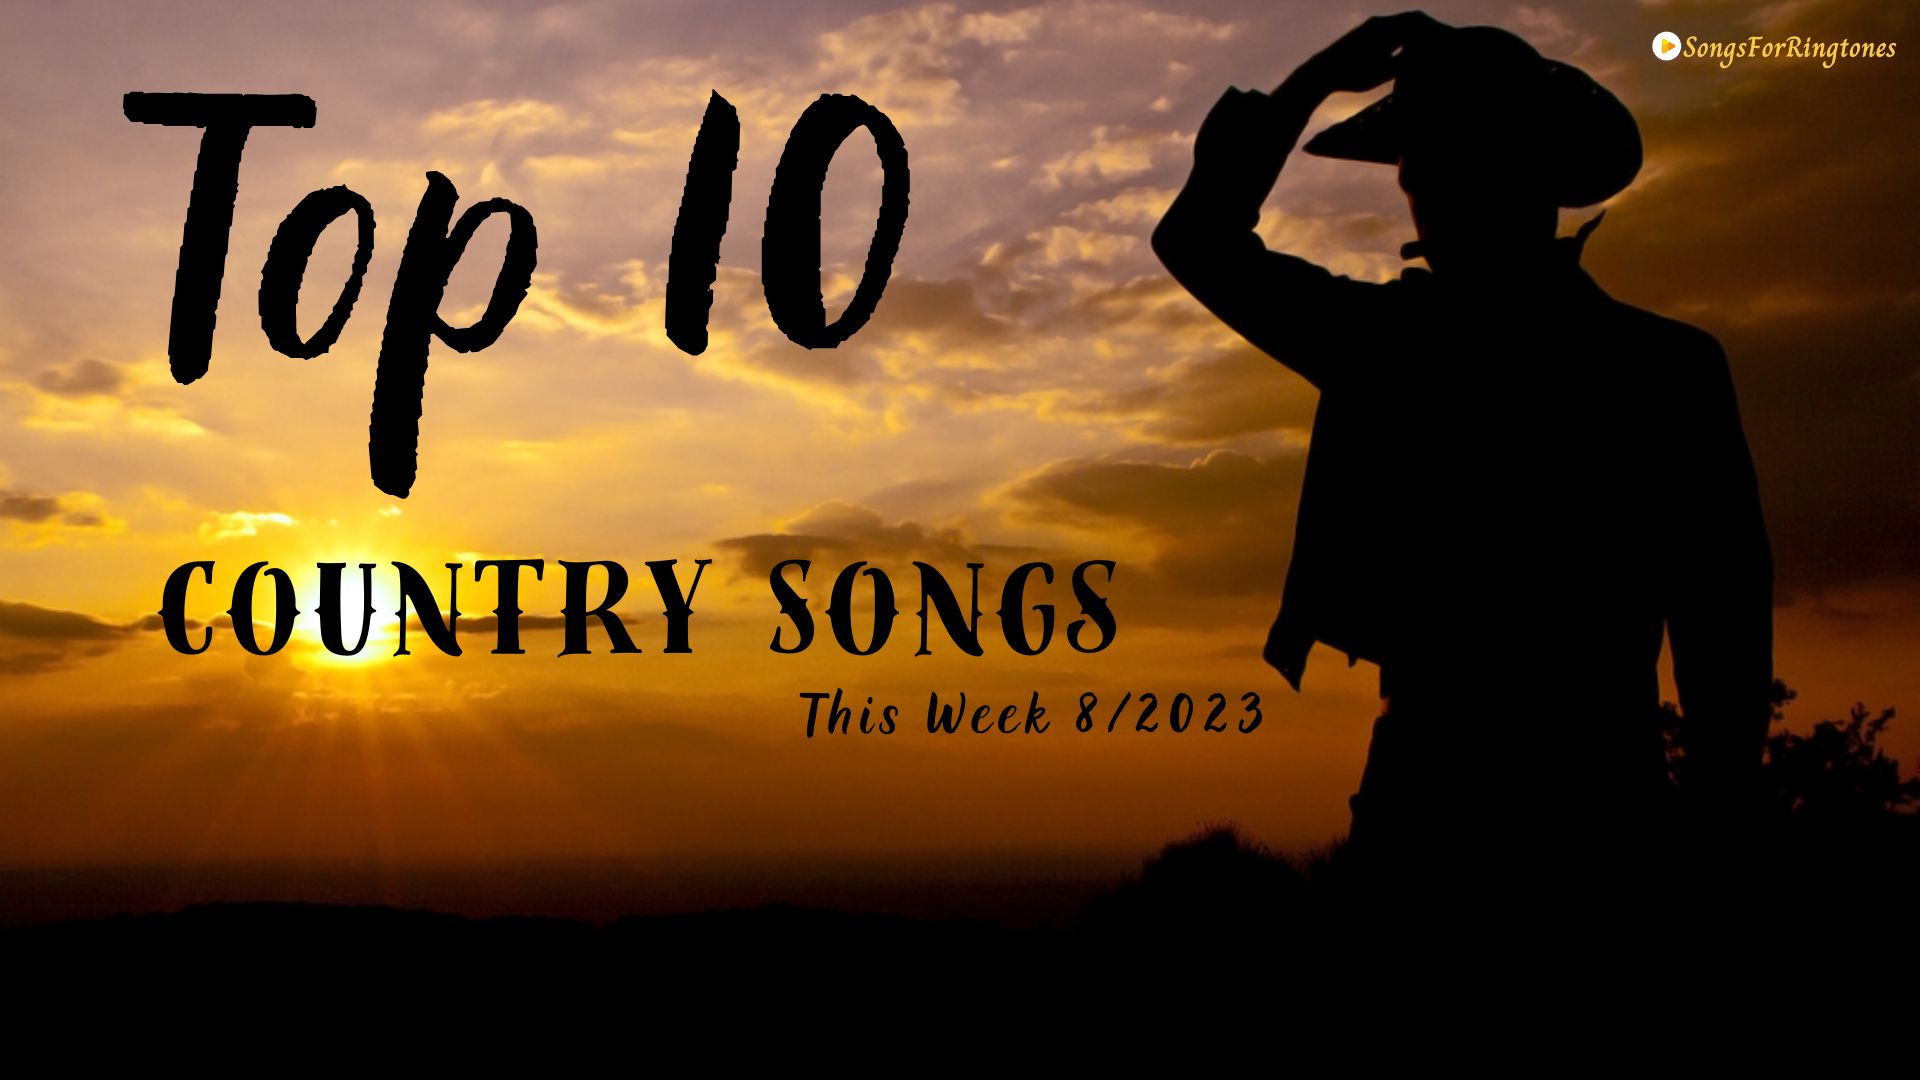 Top 10 Country Songs This Week (Updated 8/2023) - The Hottest Tracks in ...